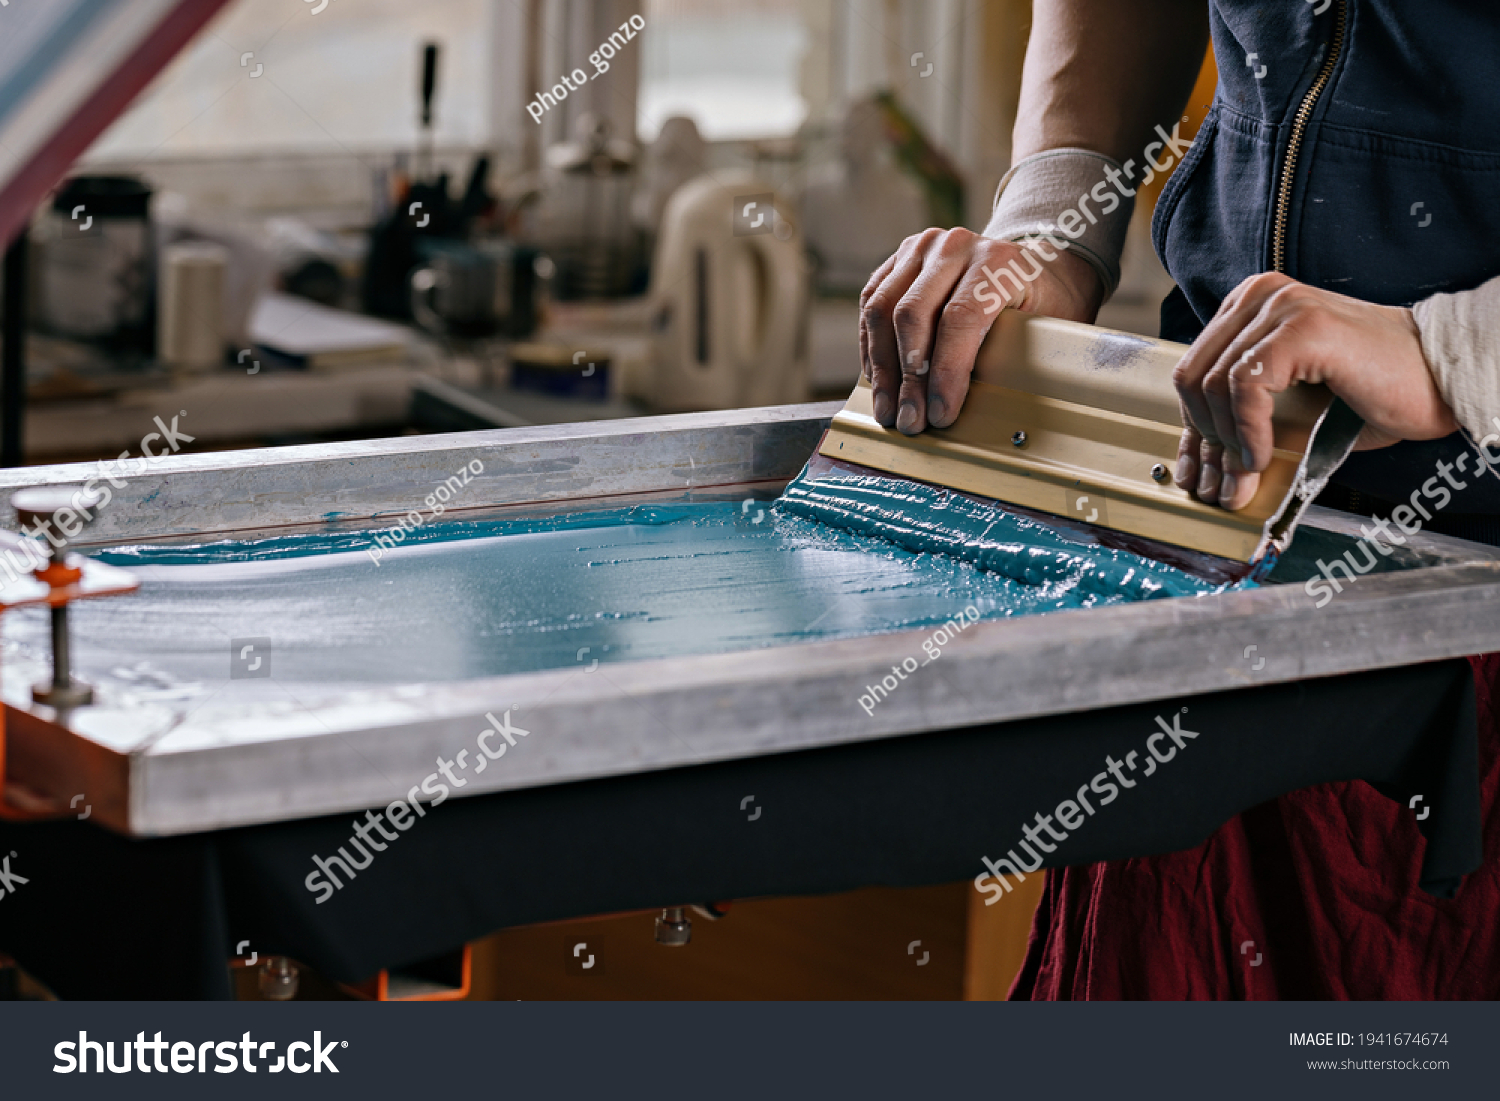 selective focus photo of male hands with squeegee. serigraphy production. printing images on t-shirts by silkscreen method in a design studio #1941674674